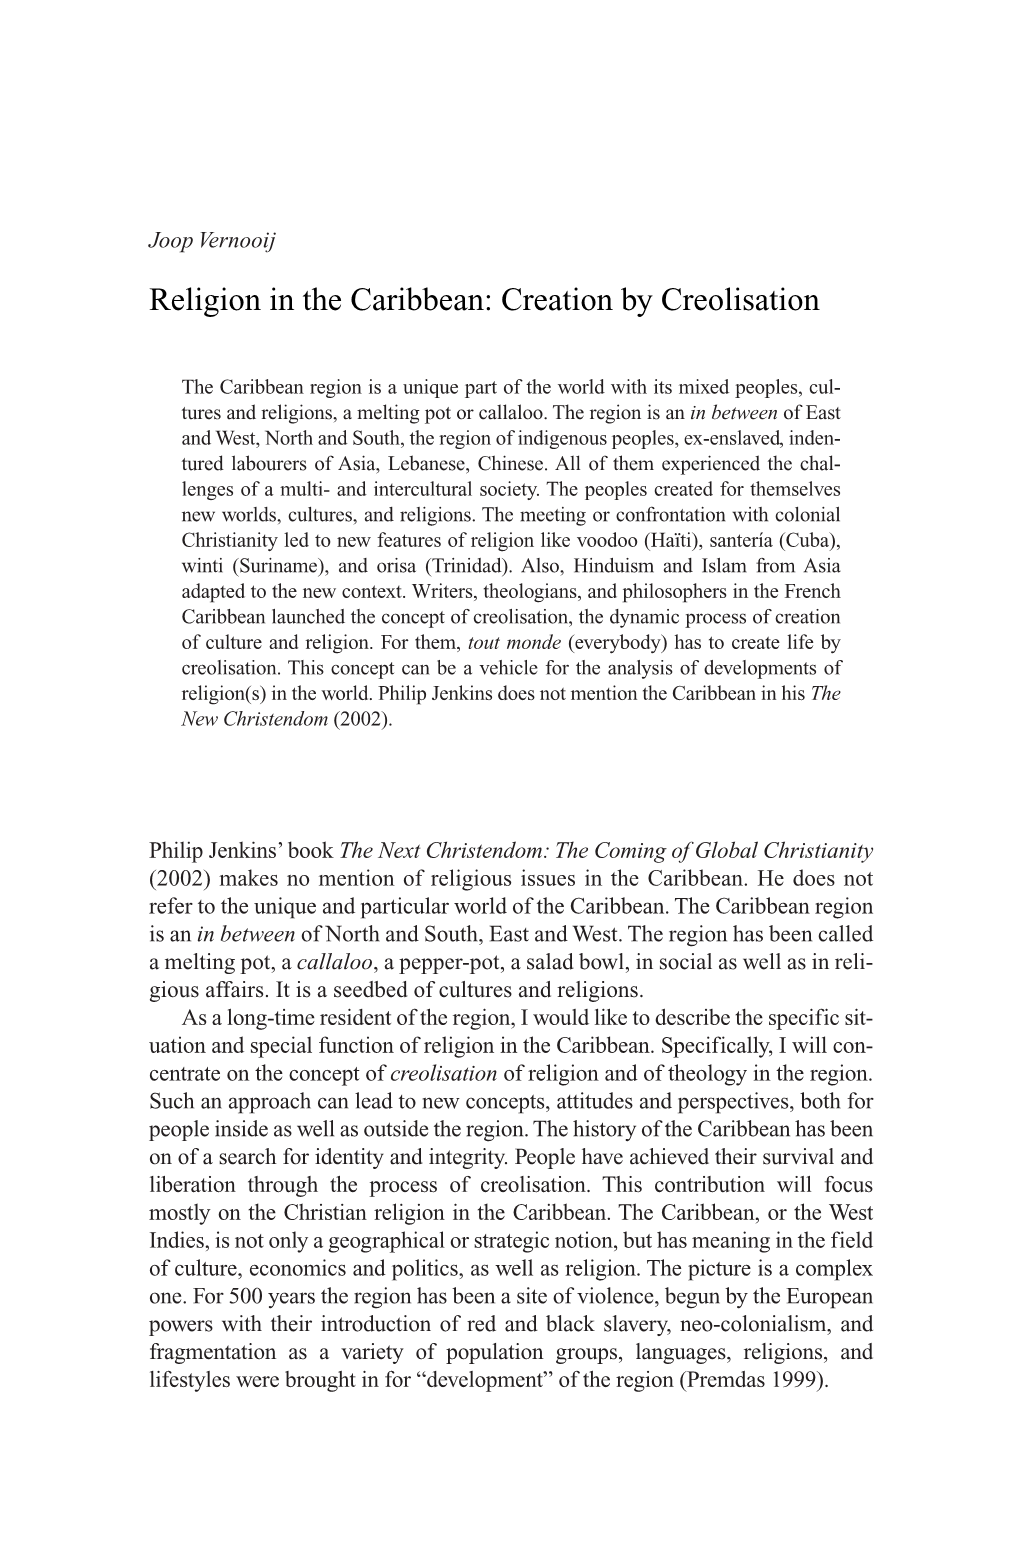 Religion in the Caribbean: Creation by Creolisation